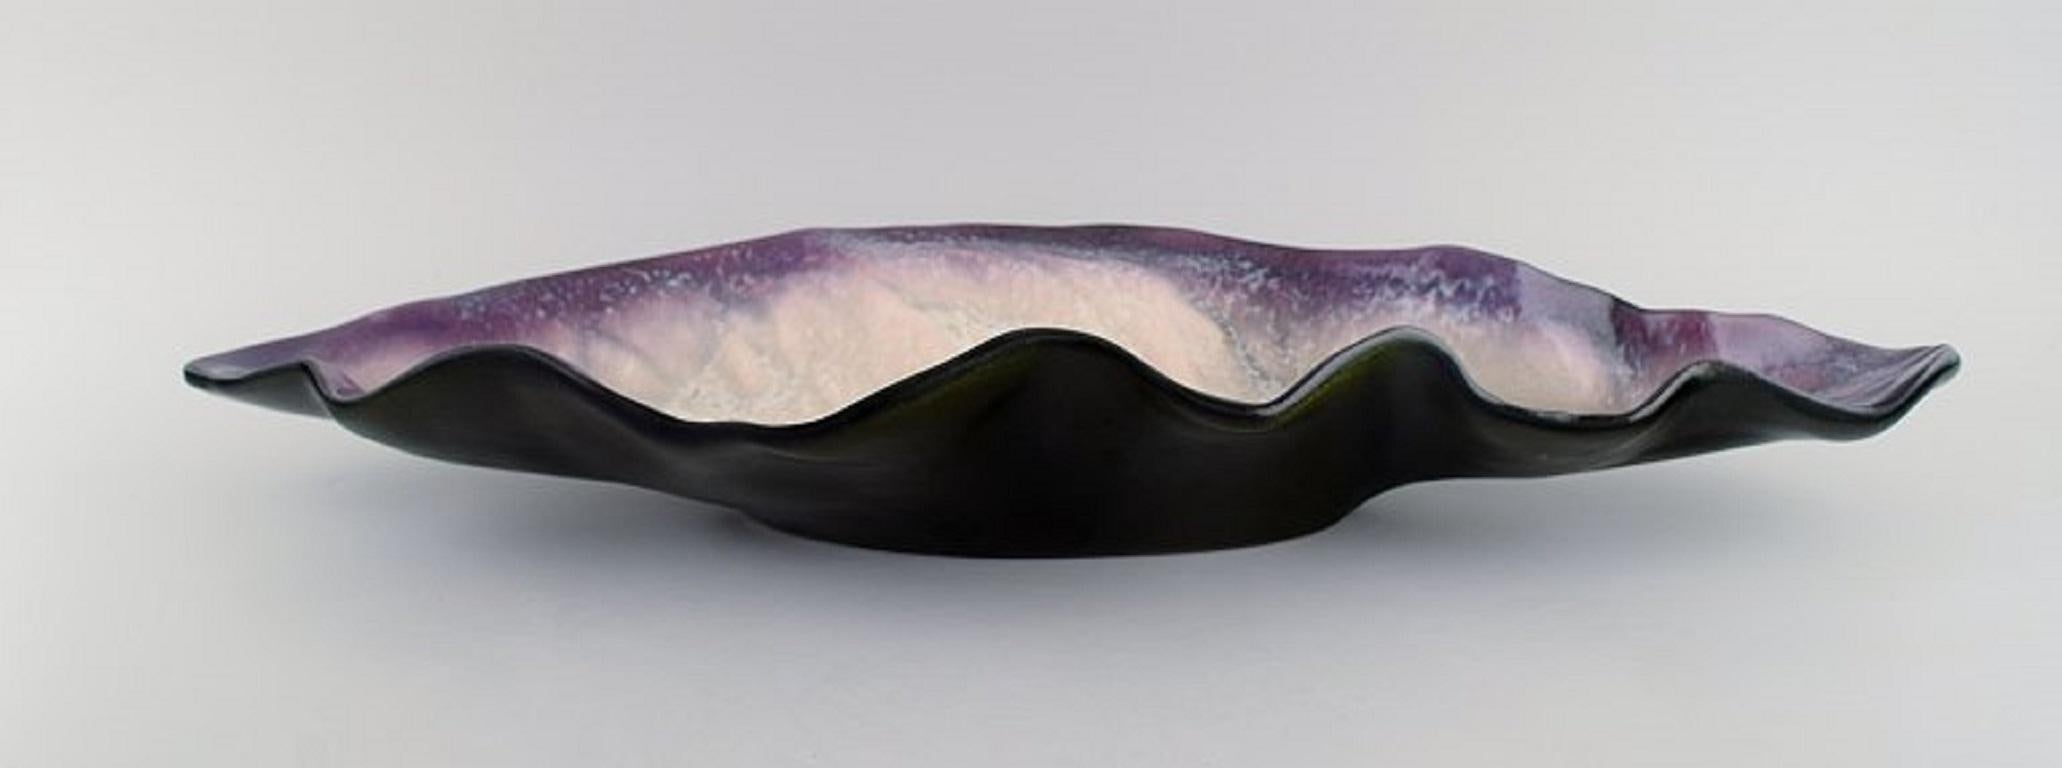 Pol Chambost (1906-1983), France. Colossal bowl in glazed stoneware shaped like a leaf.
Beautiful glaze in purple and light pink shades. 1940s.
Measures: 60.5 x 20 cm.
Height: 9 cm.
In excellent condition.
Signed.